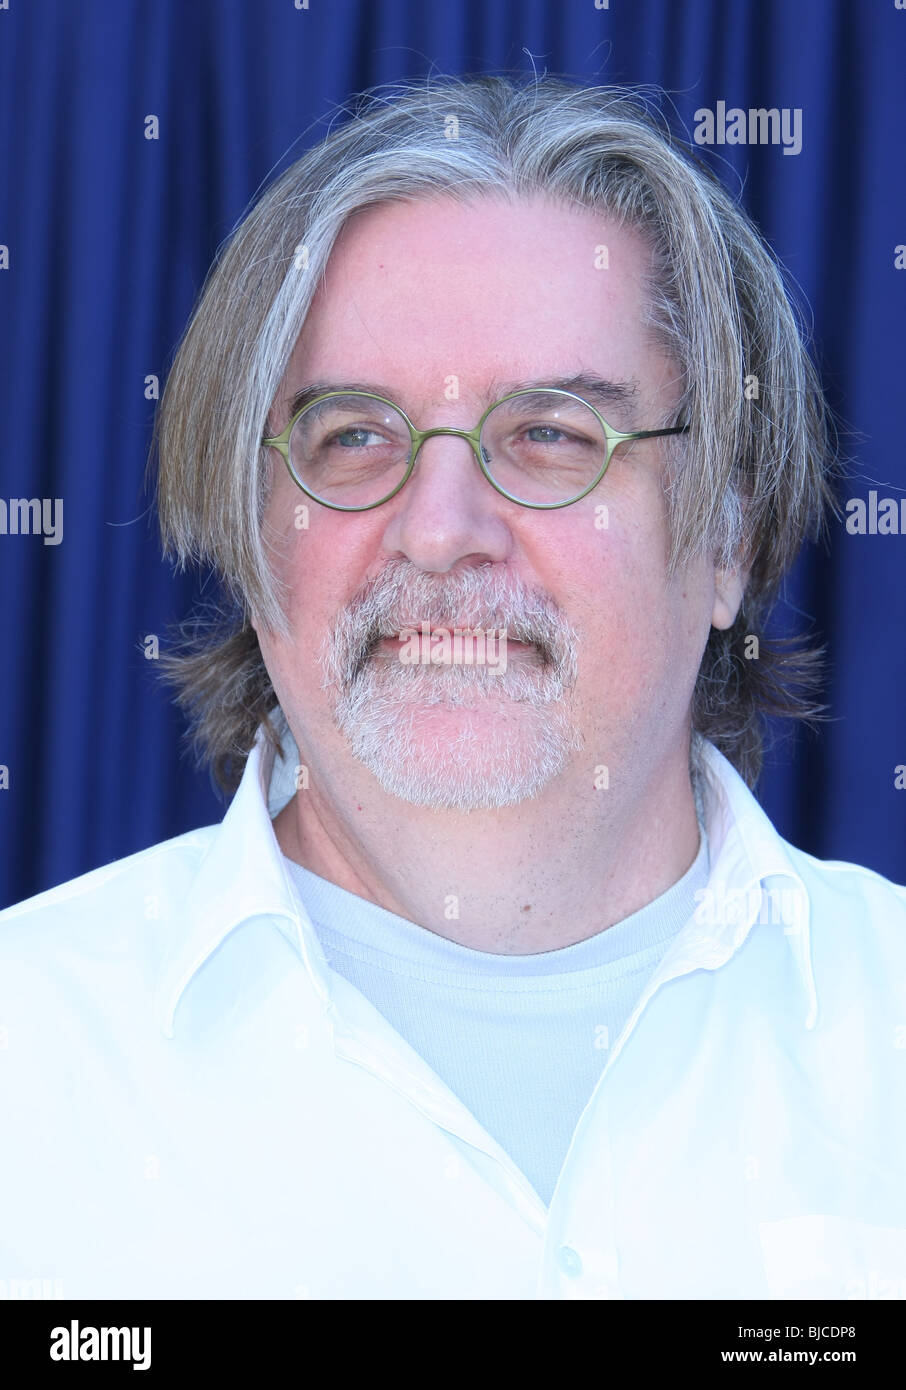 MATT GROENING FIRST DAY ISSUE OF THE SIMPSONS STAMPS US POSTAL SERVICE CENTURY CITY LOS ANGELES CA USA 07 May 2009 Stock Photo